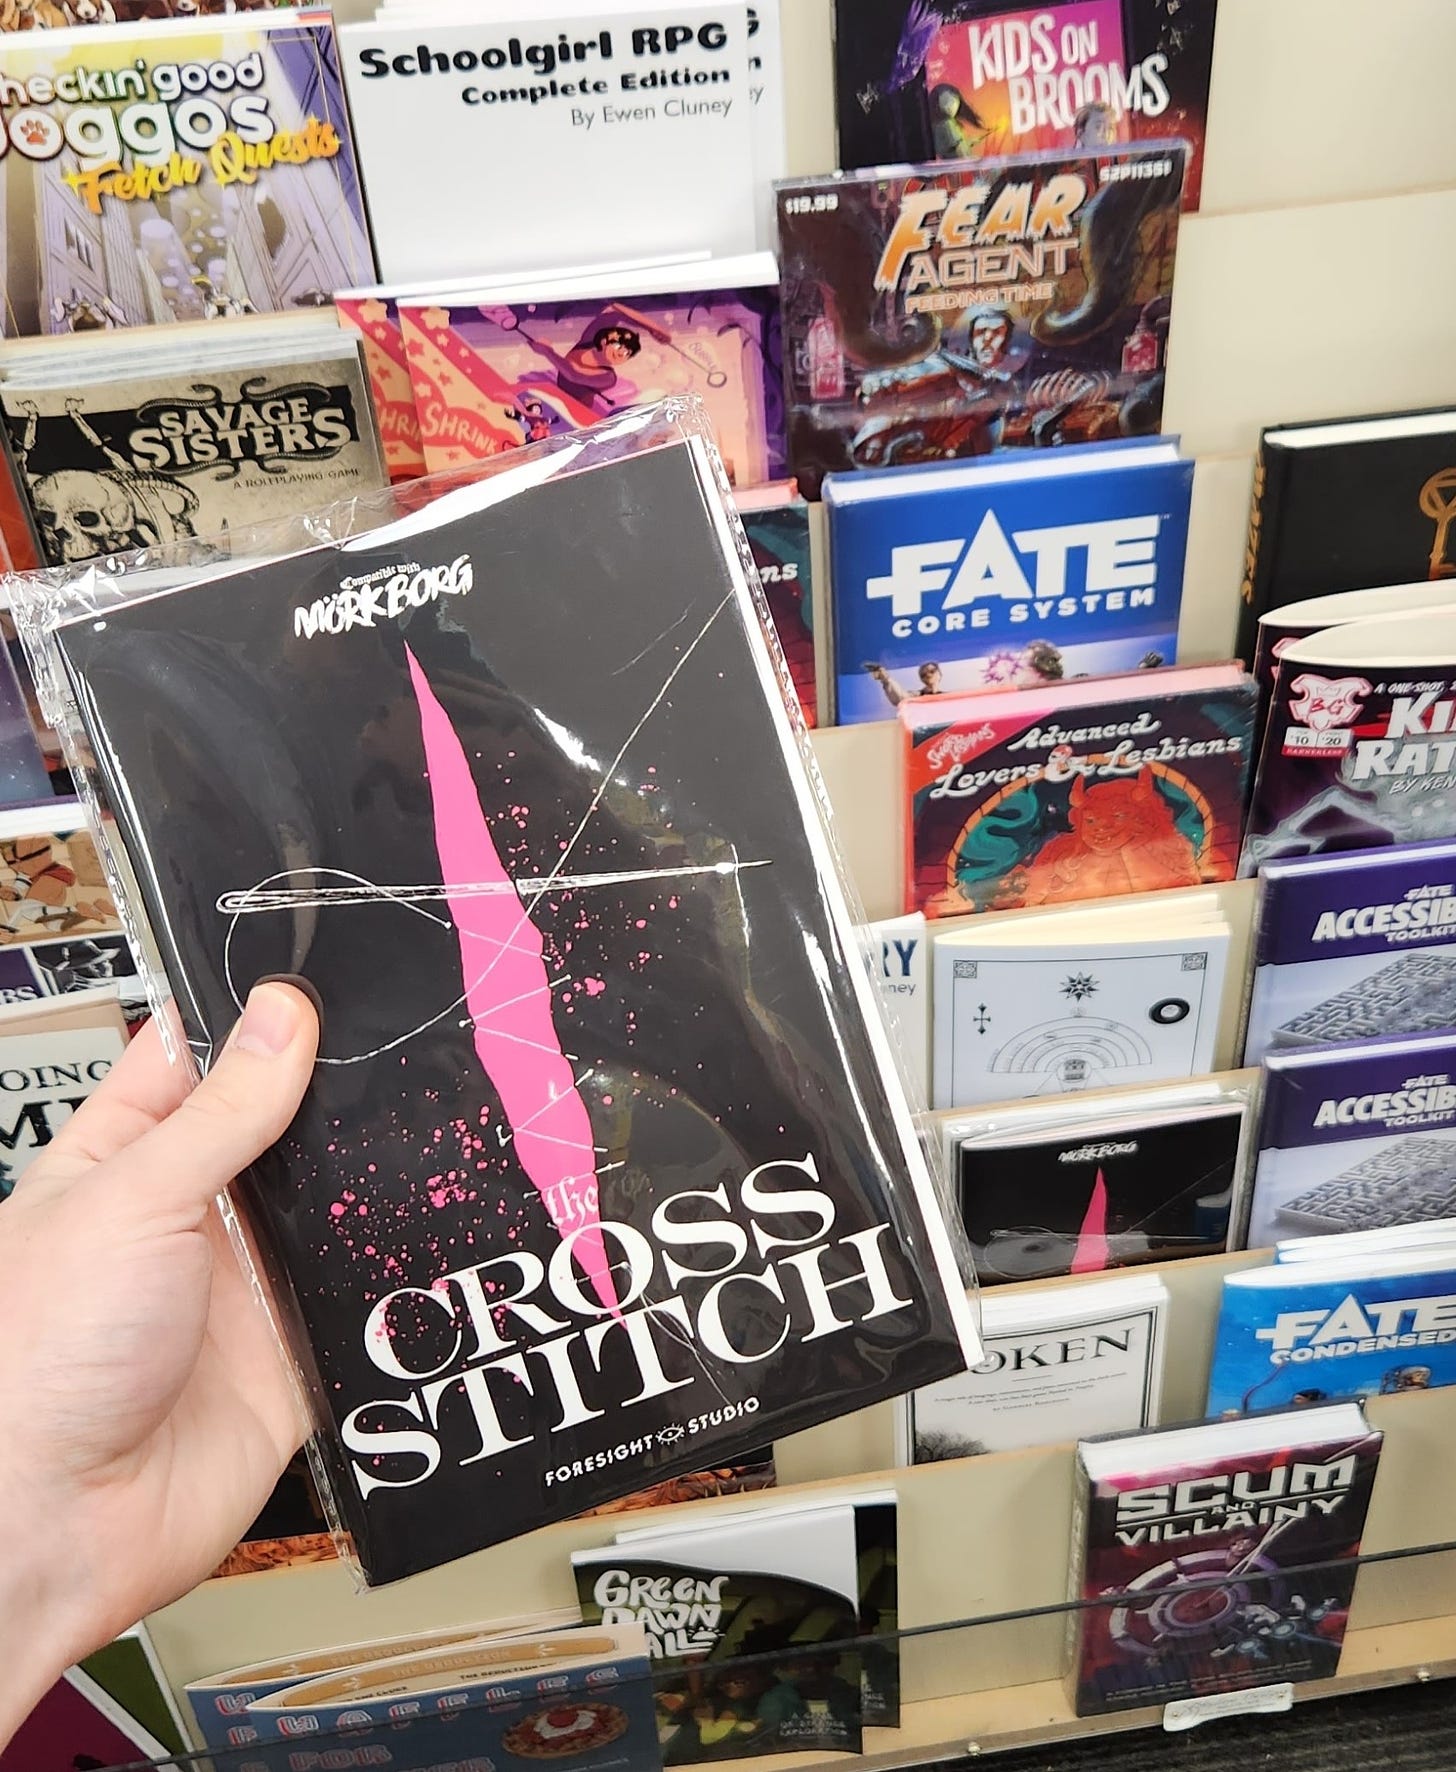 A hand holding a copy of Mork Borg zine The Cross Stitch, in front of a rack of other TTRPG books and supplements.